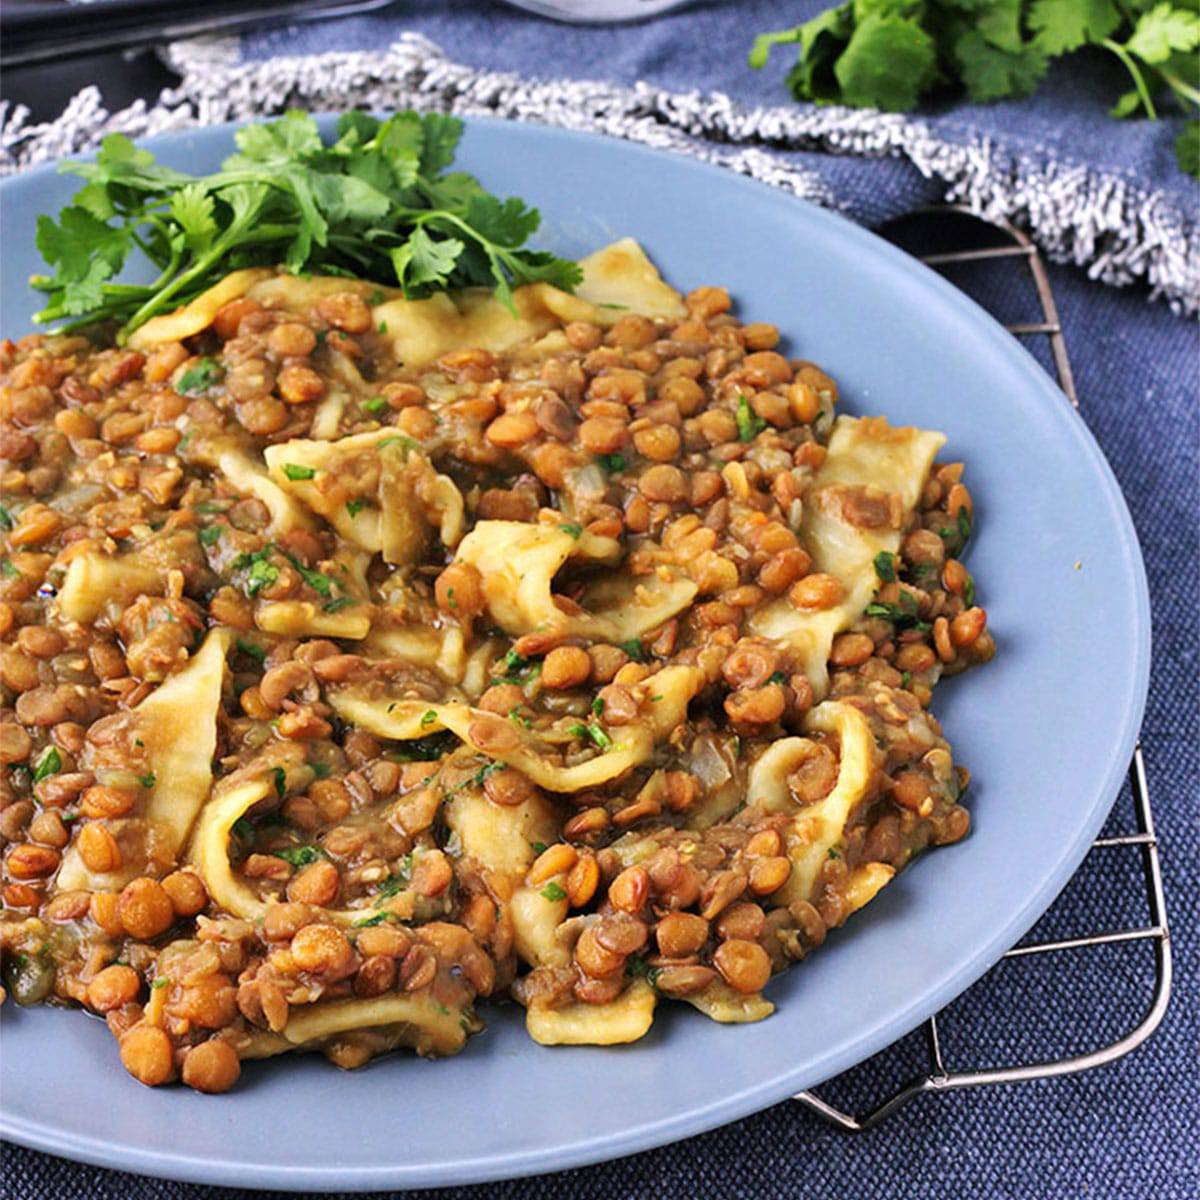 Green lentils simmered with onions and garlic with homemade vegan pasta and chopped cilantro.